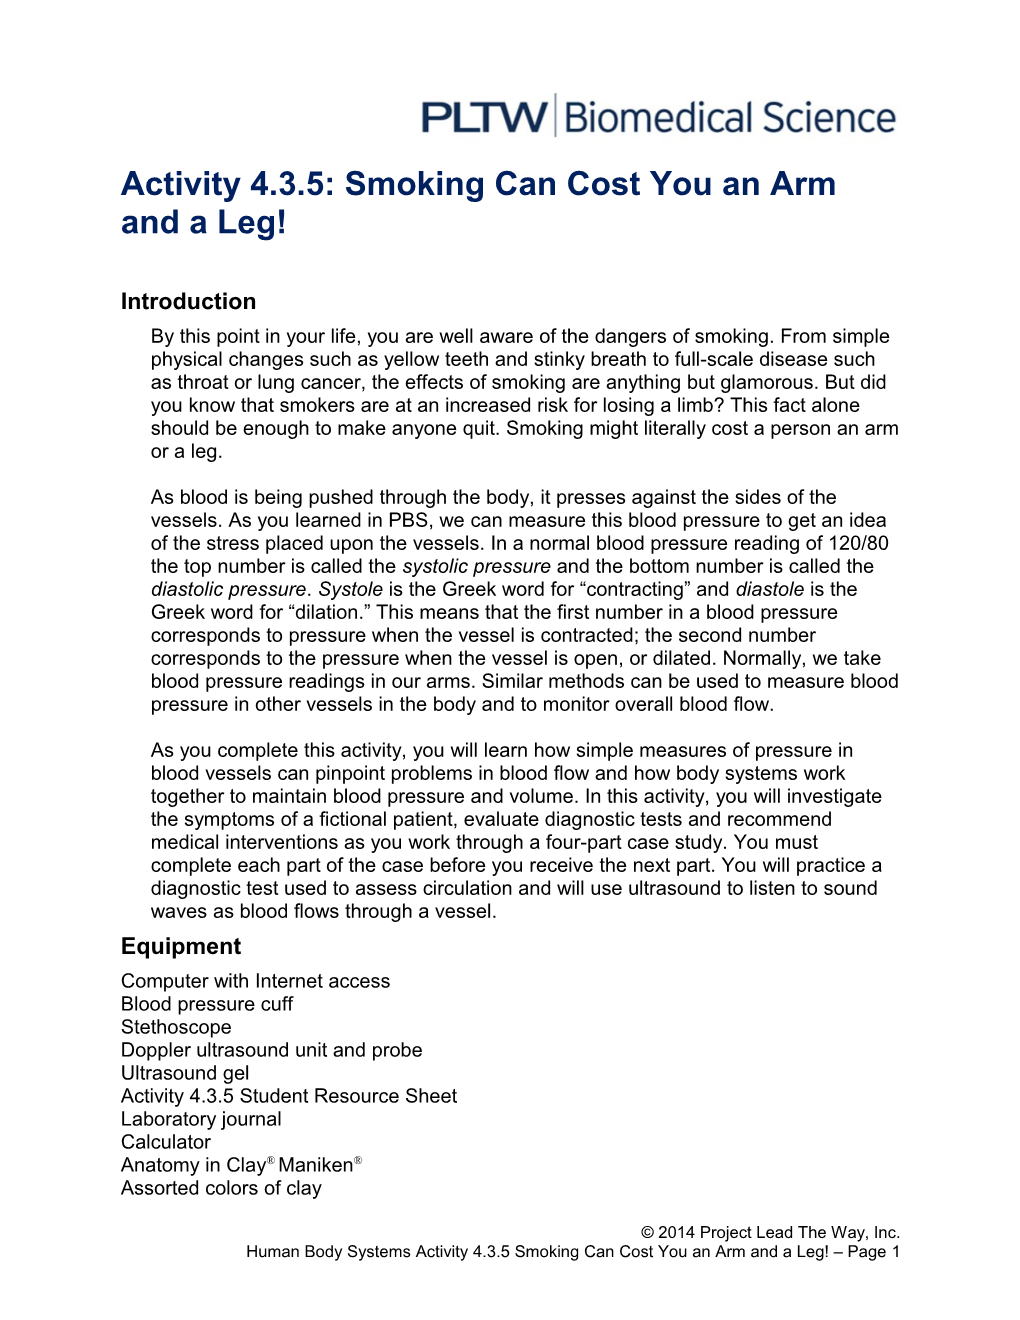 Activity 4.3.5: Smoking Can Cost You an Arm and a Leg! s1